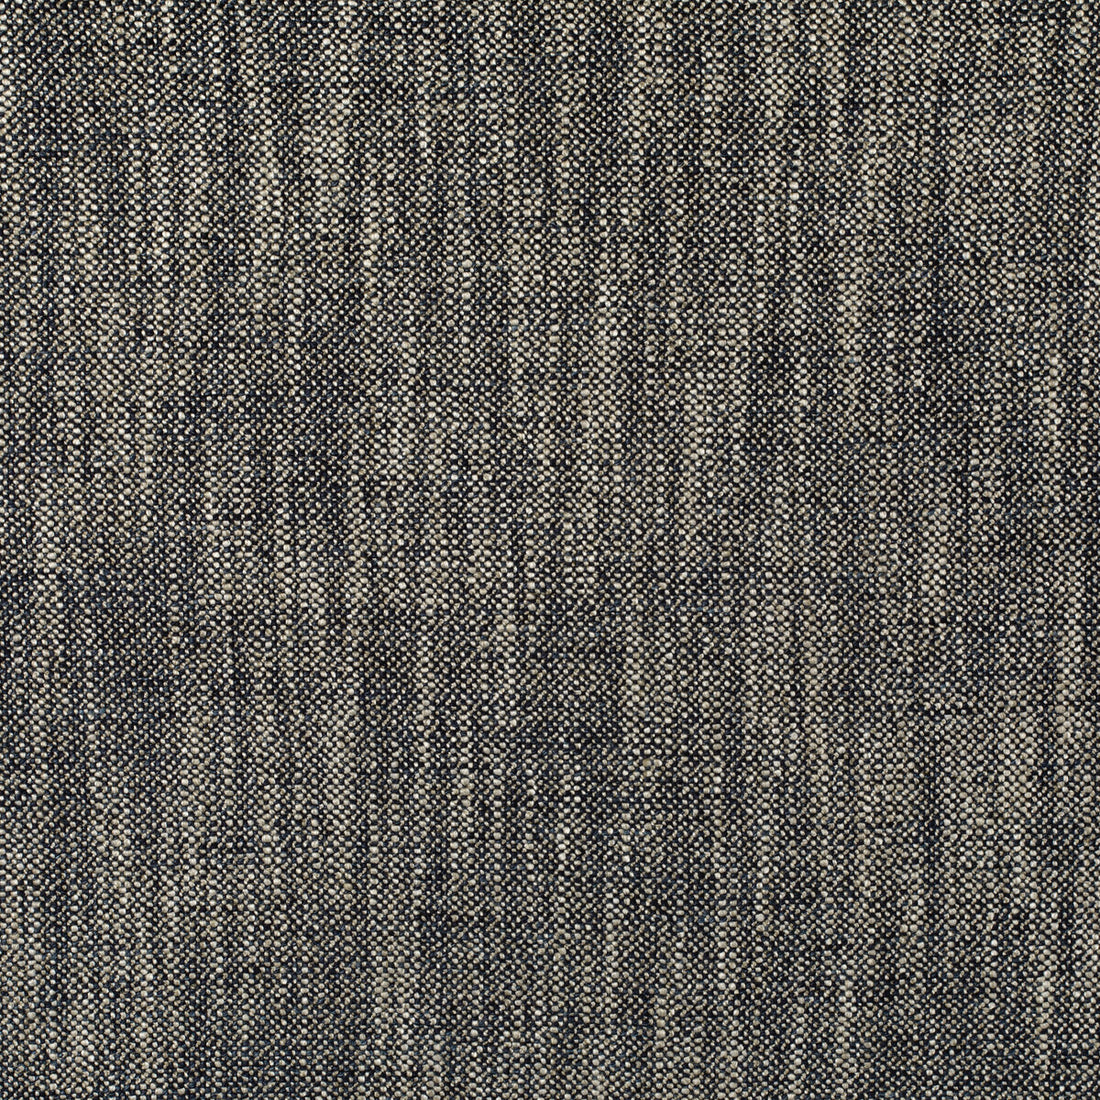 Pasaro fabric in ebony color - pattern 35904.511.0 - by Kravet Couture in the Linherr Hollingsworth Boheme II collection